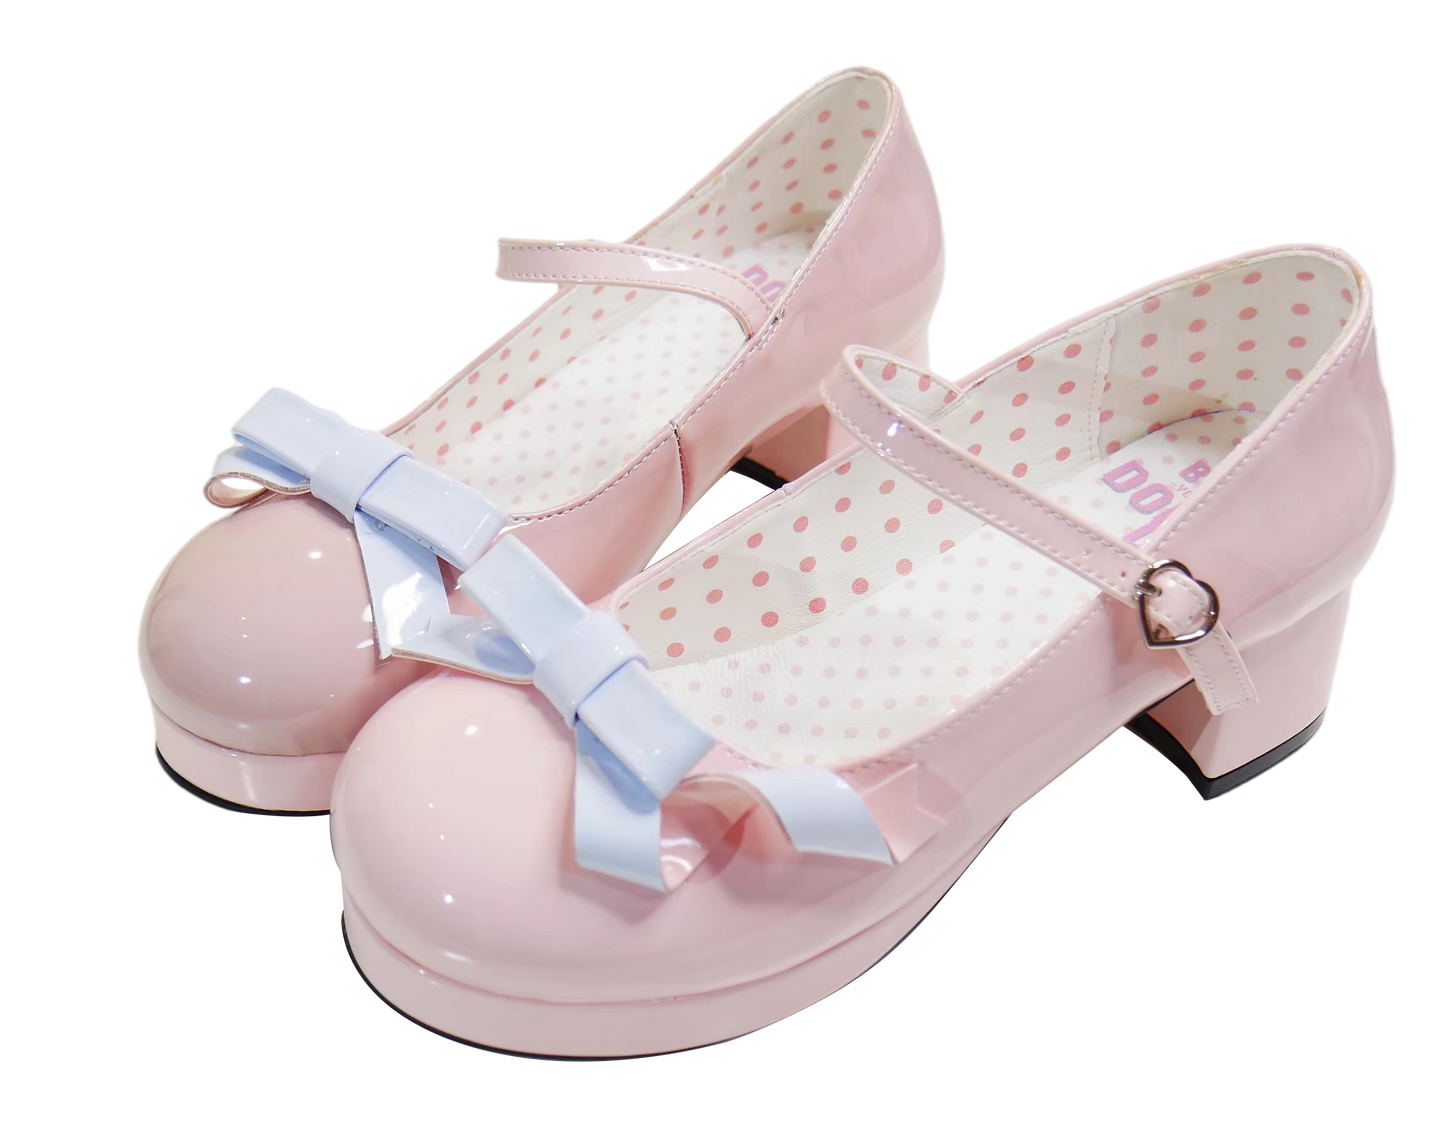 Lolita Shoes High Heels With Bowknot Shallow Mouth Shoes 37026:556964